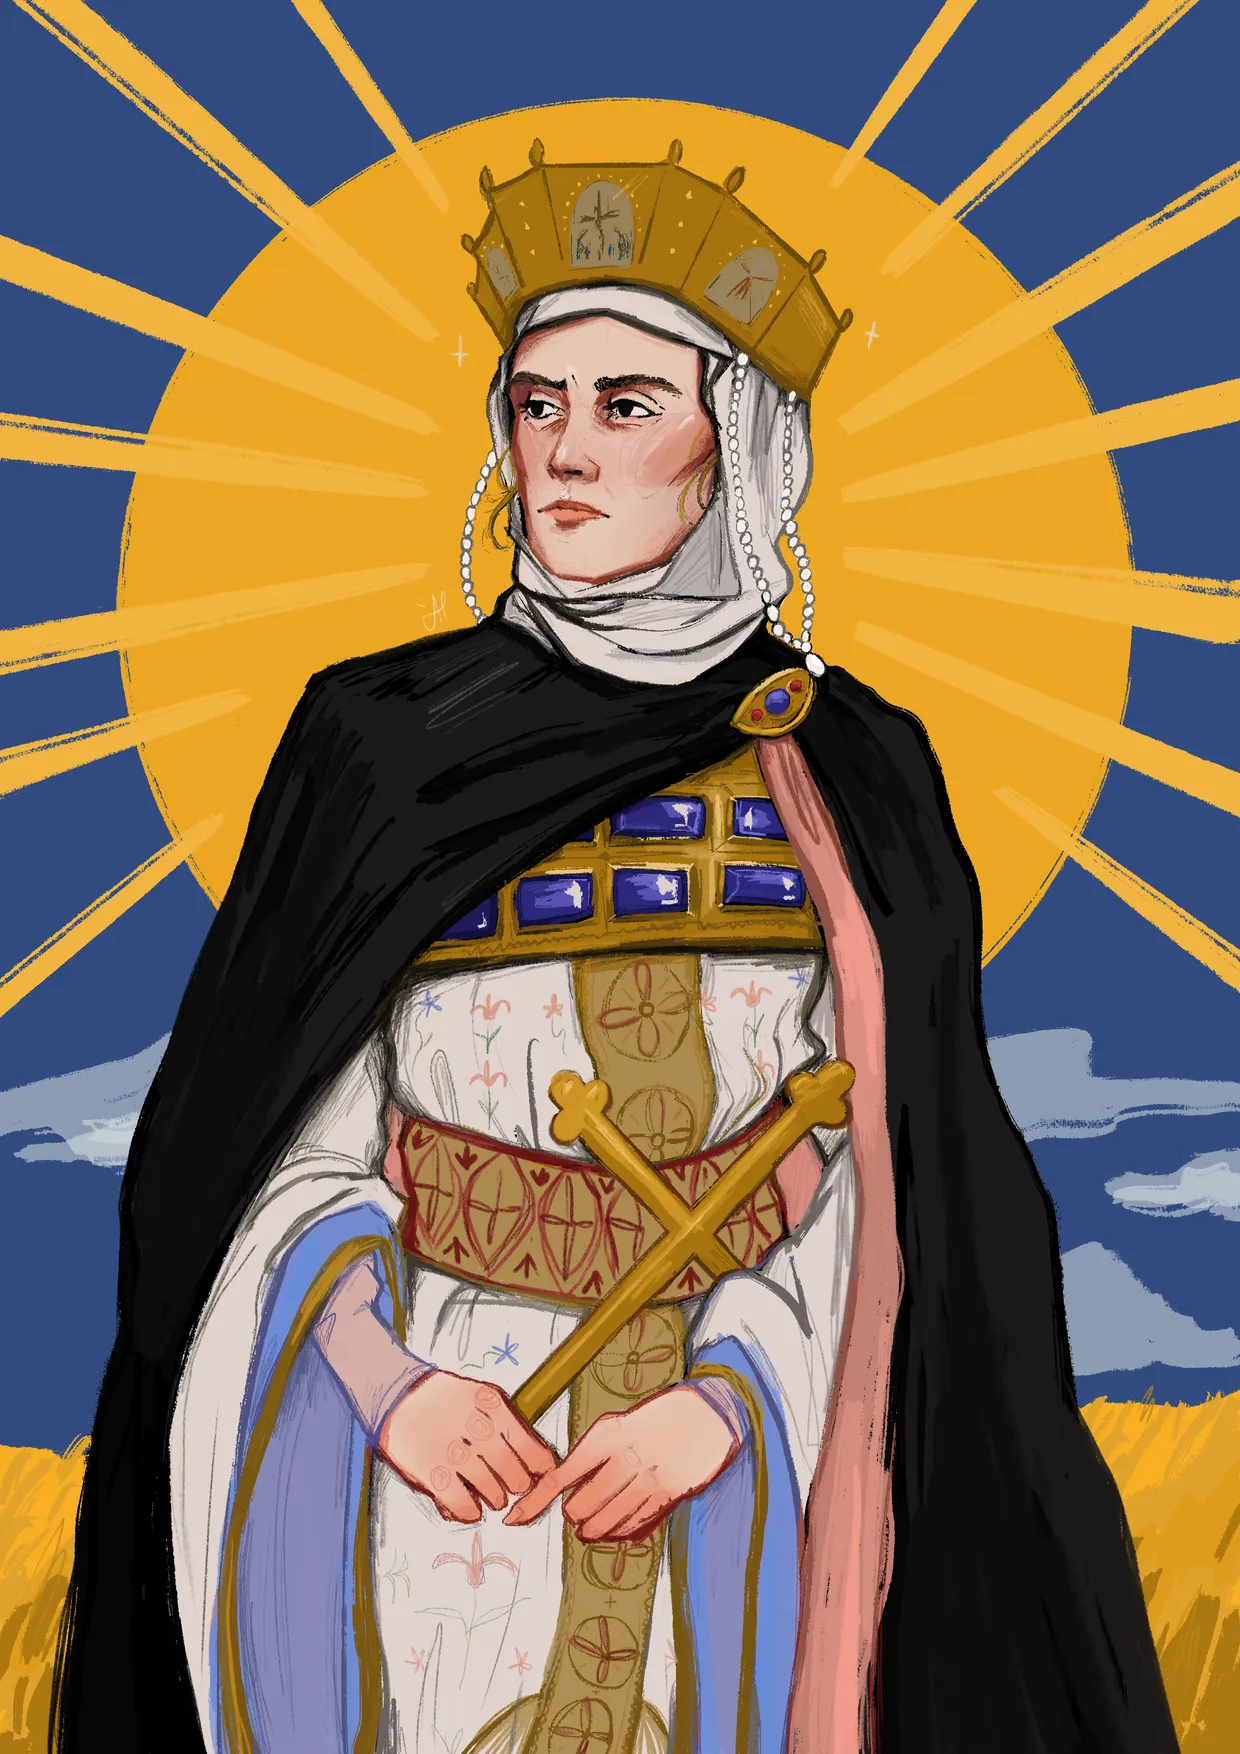 a digital illustration depicting Saint Olga of Kyiv, a Ukrainian queen from Middle Ages